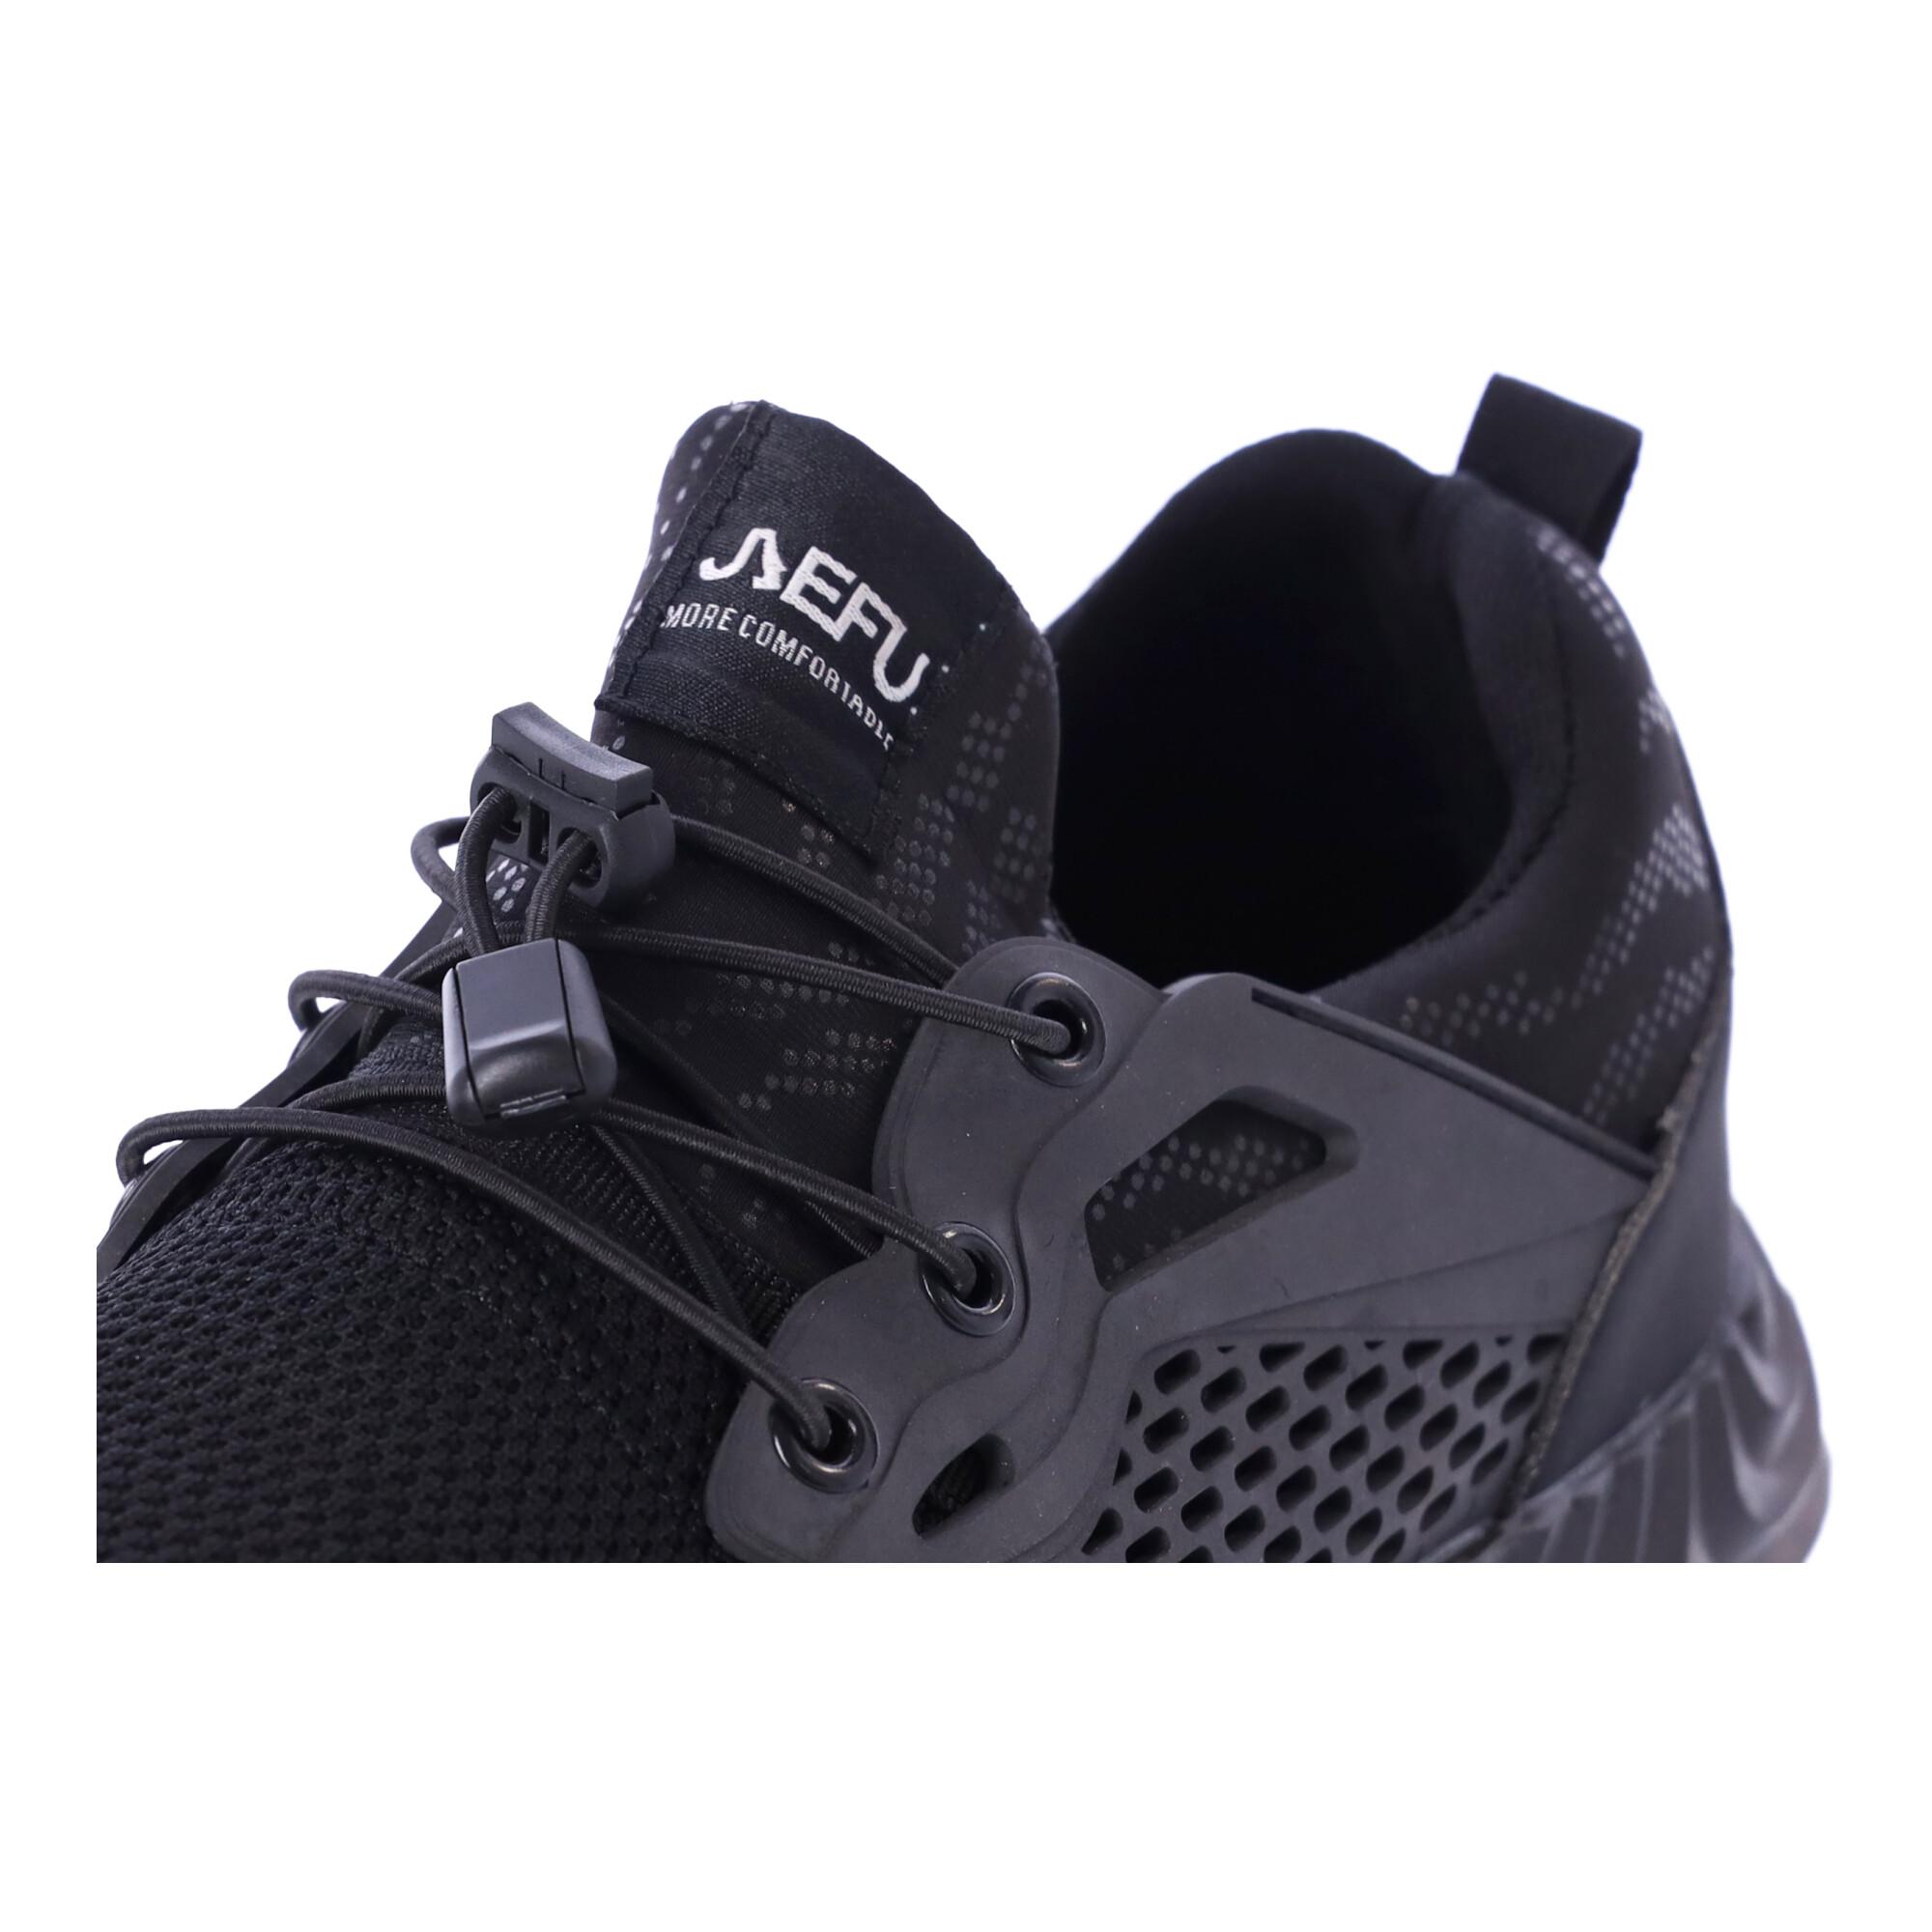 Work safety shoes "43" - black